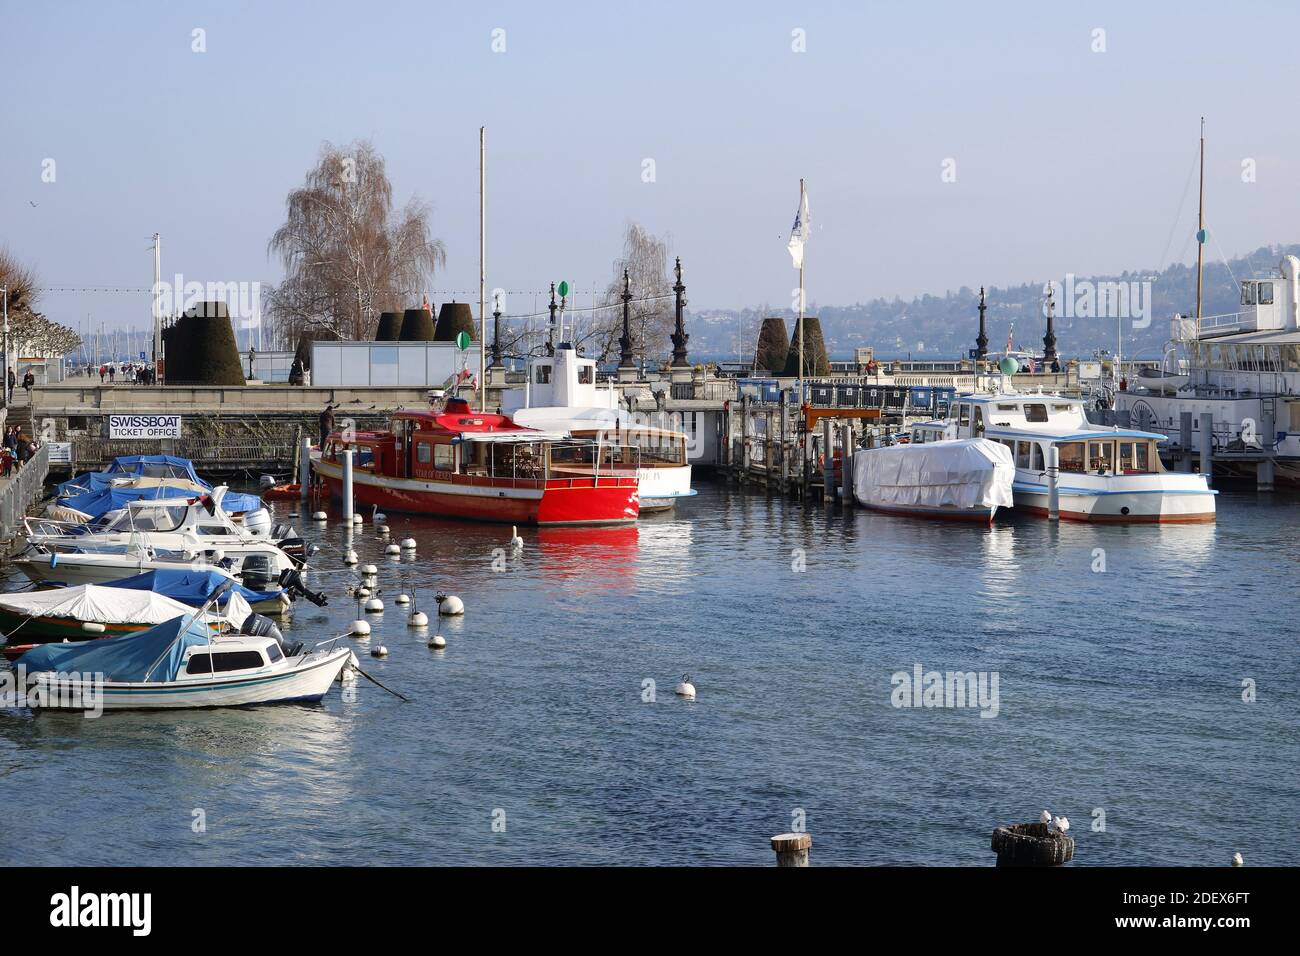 GENEVA, SWITZERLAND - Feb 20, 2018: City trip in Geneva during winter. Picture shows boats on lake with mountains in background. Stock Photo